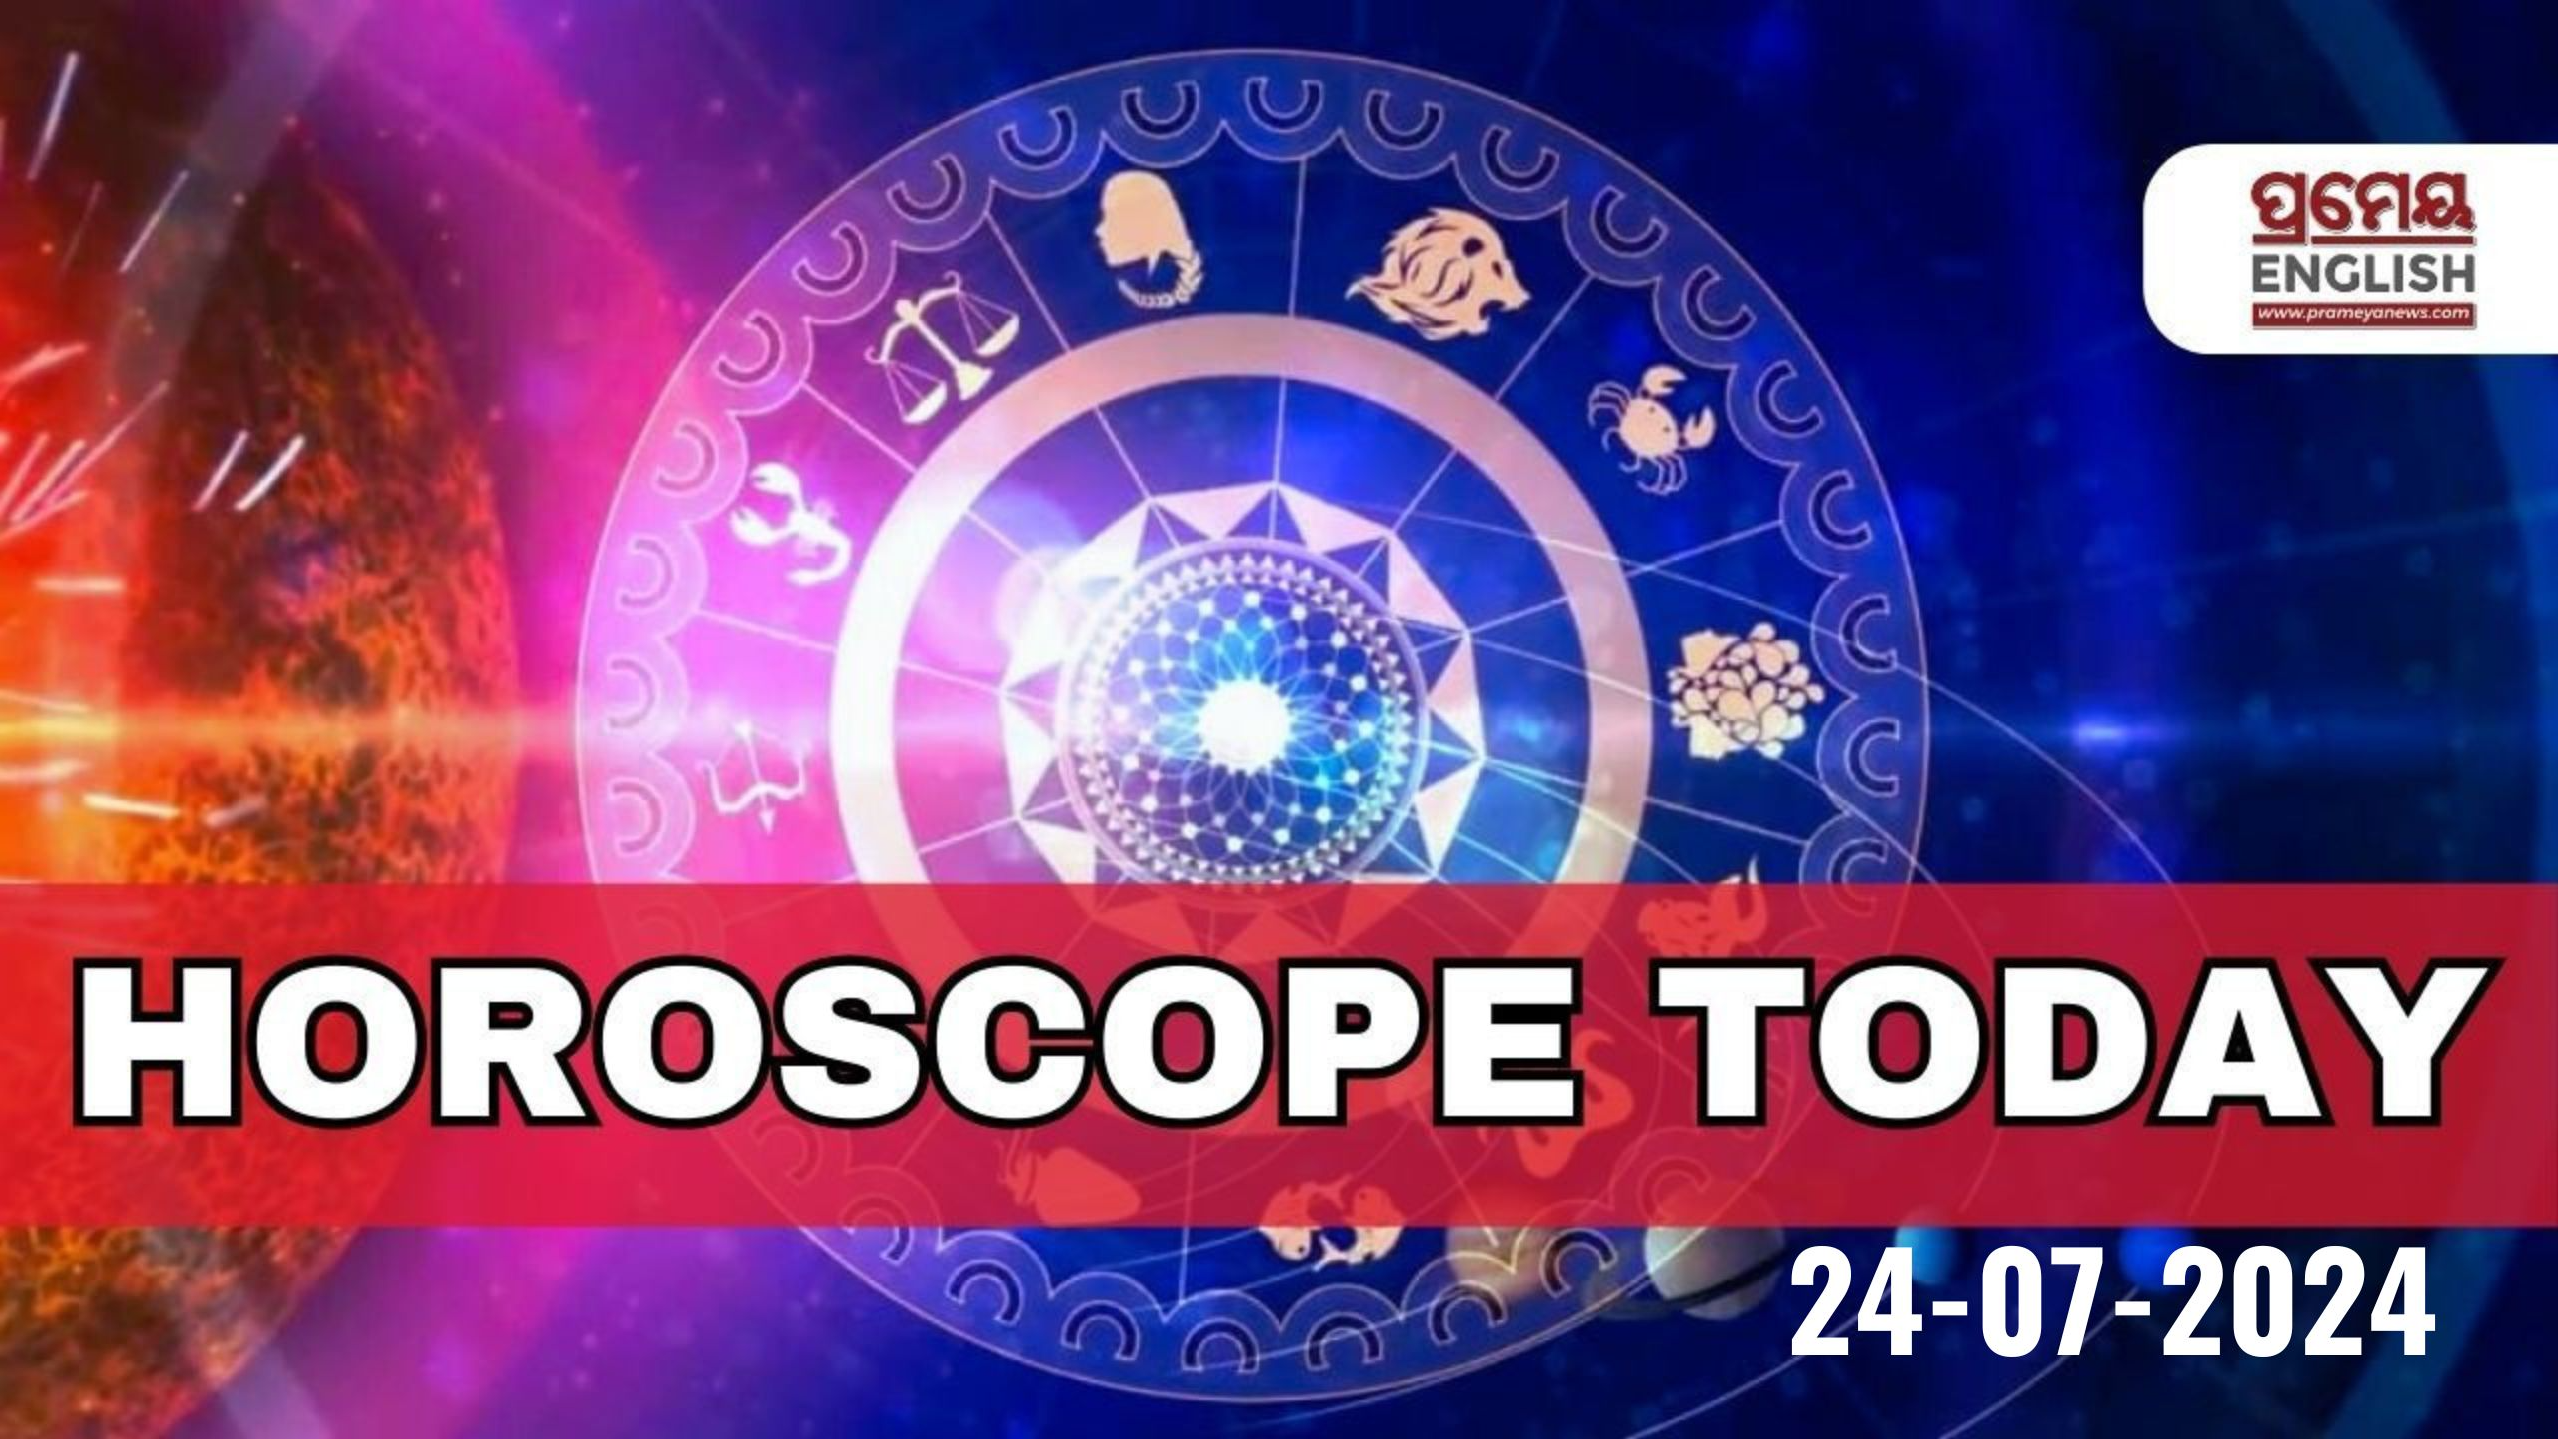 Horoscope Today: Astrological prediction for May 31, 2024